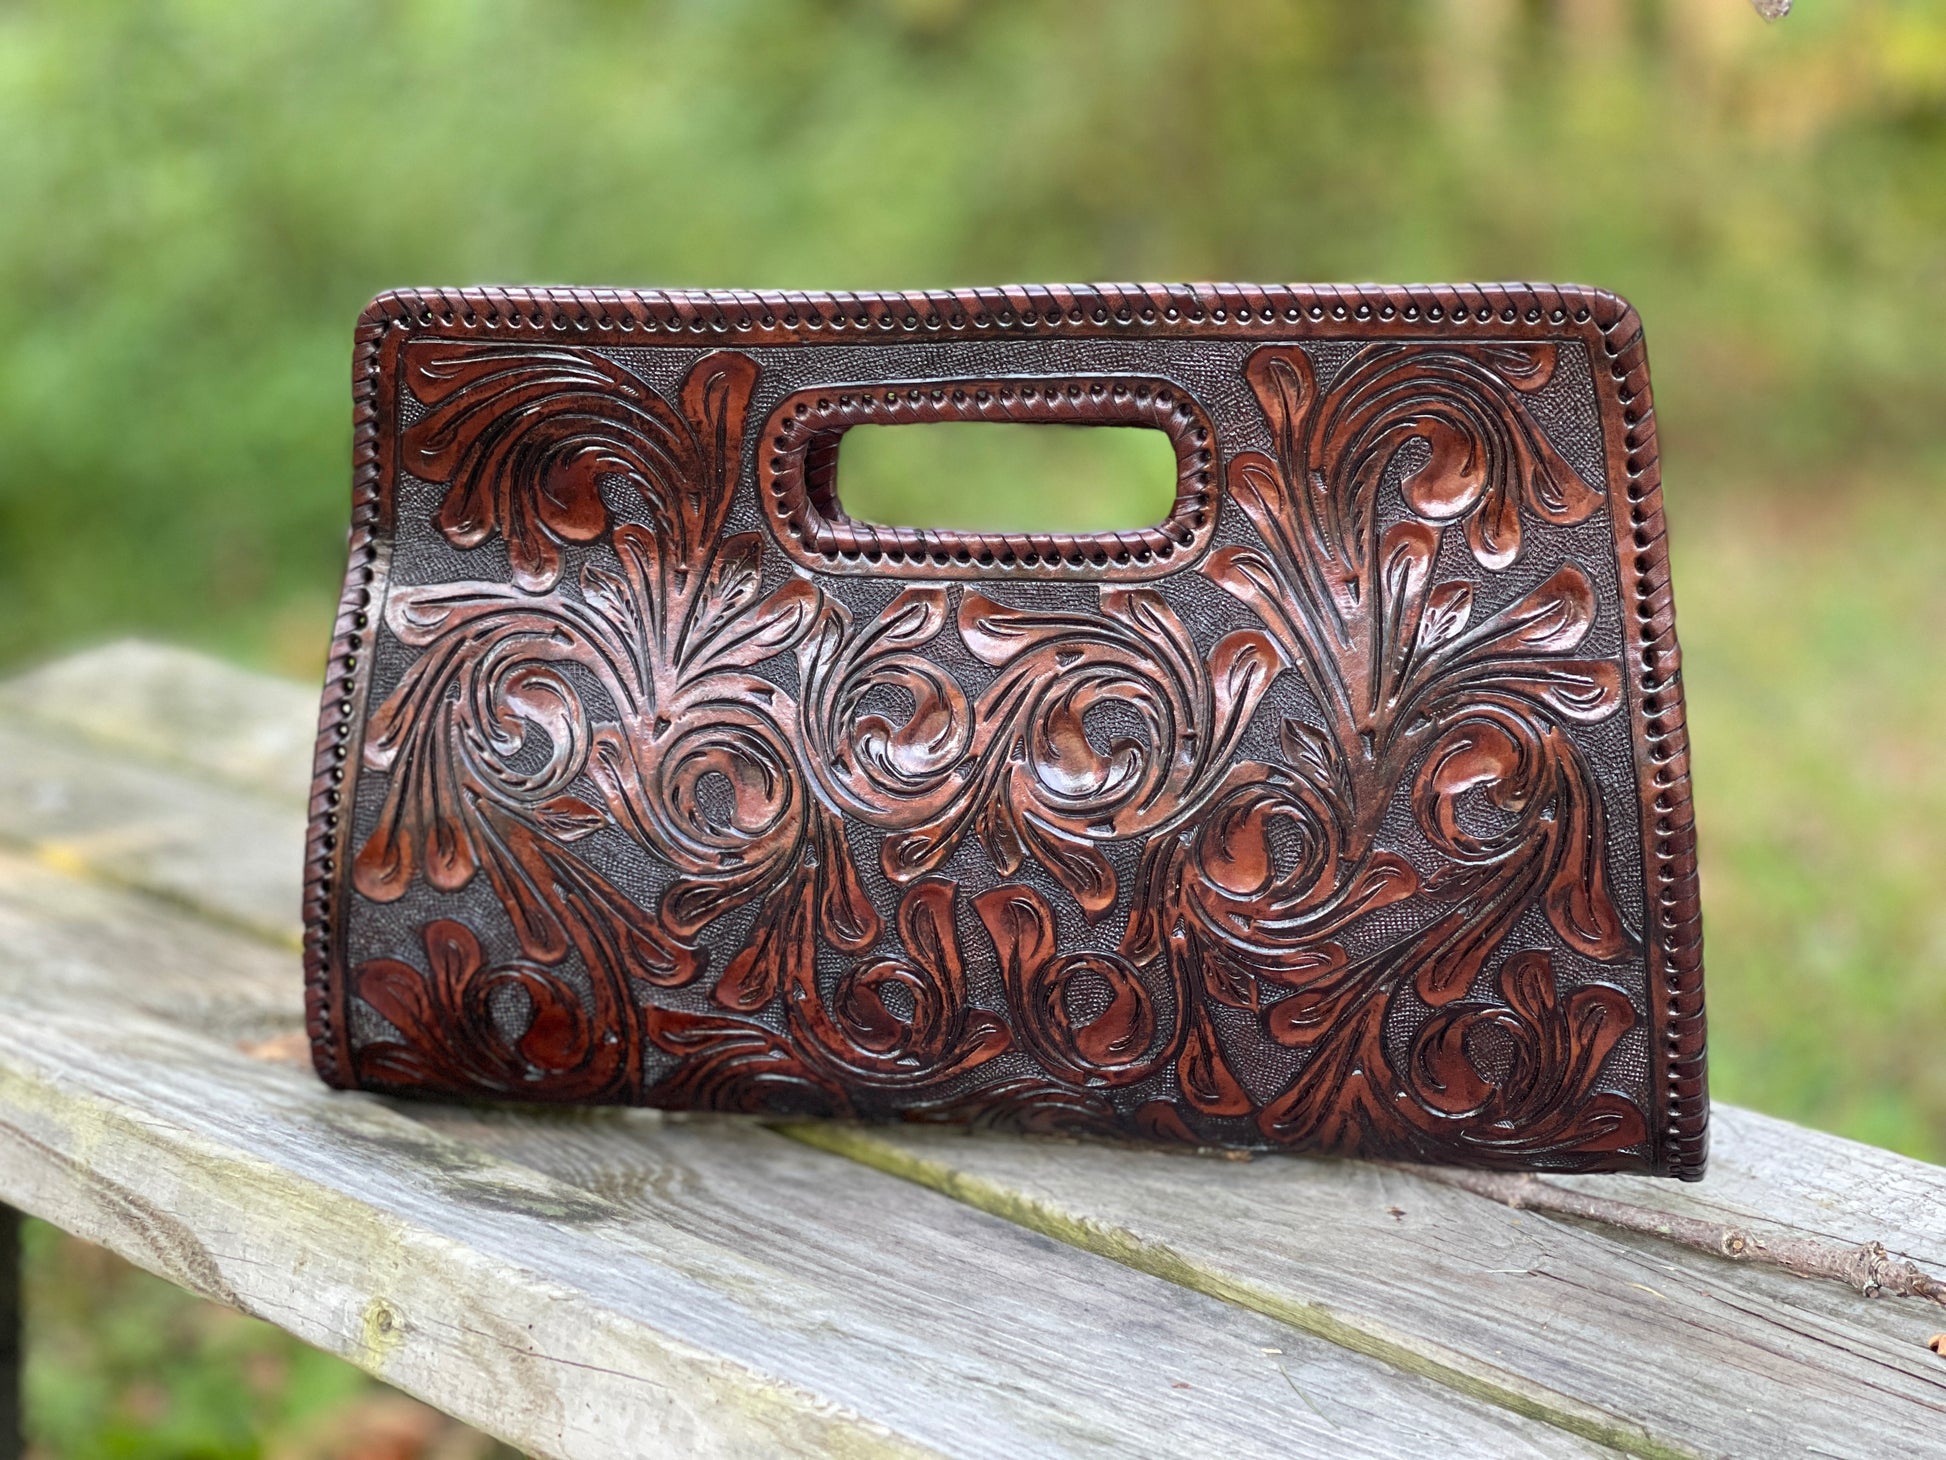 Hand-Tooled Leather Large Clutch Bag "ENVELOPE" by ALLE more Colors - ALLE Handbags